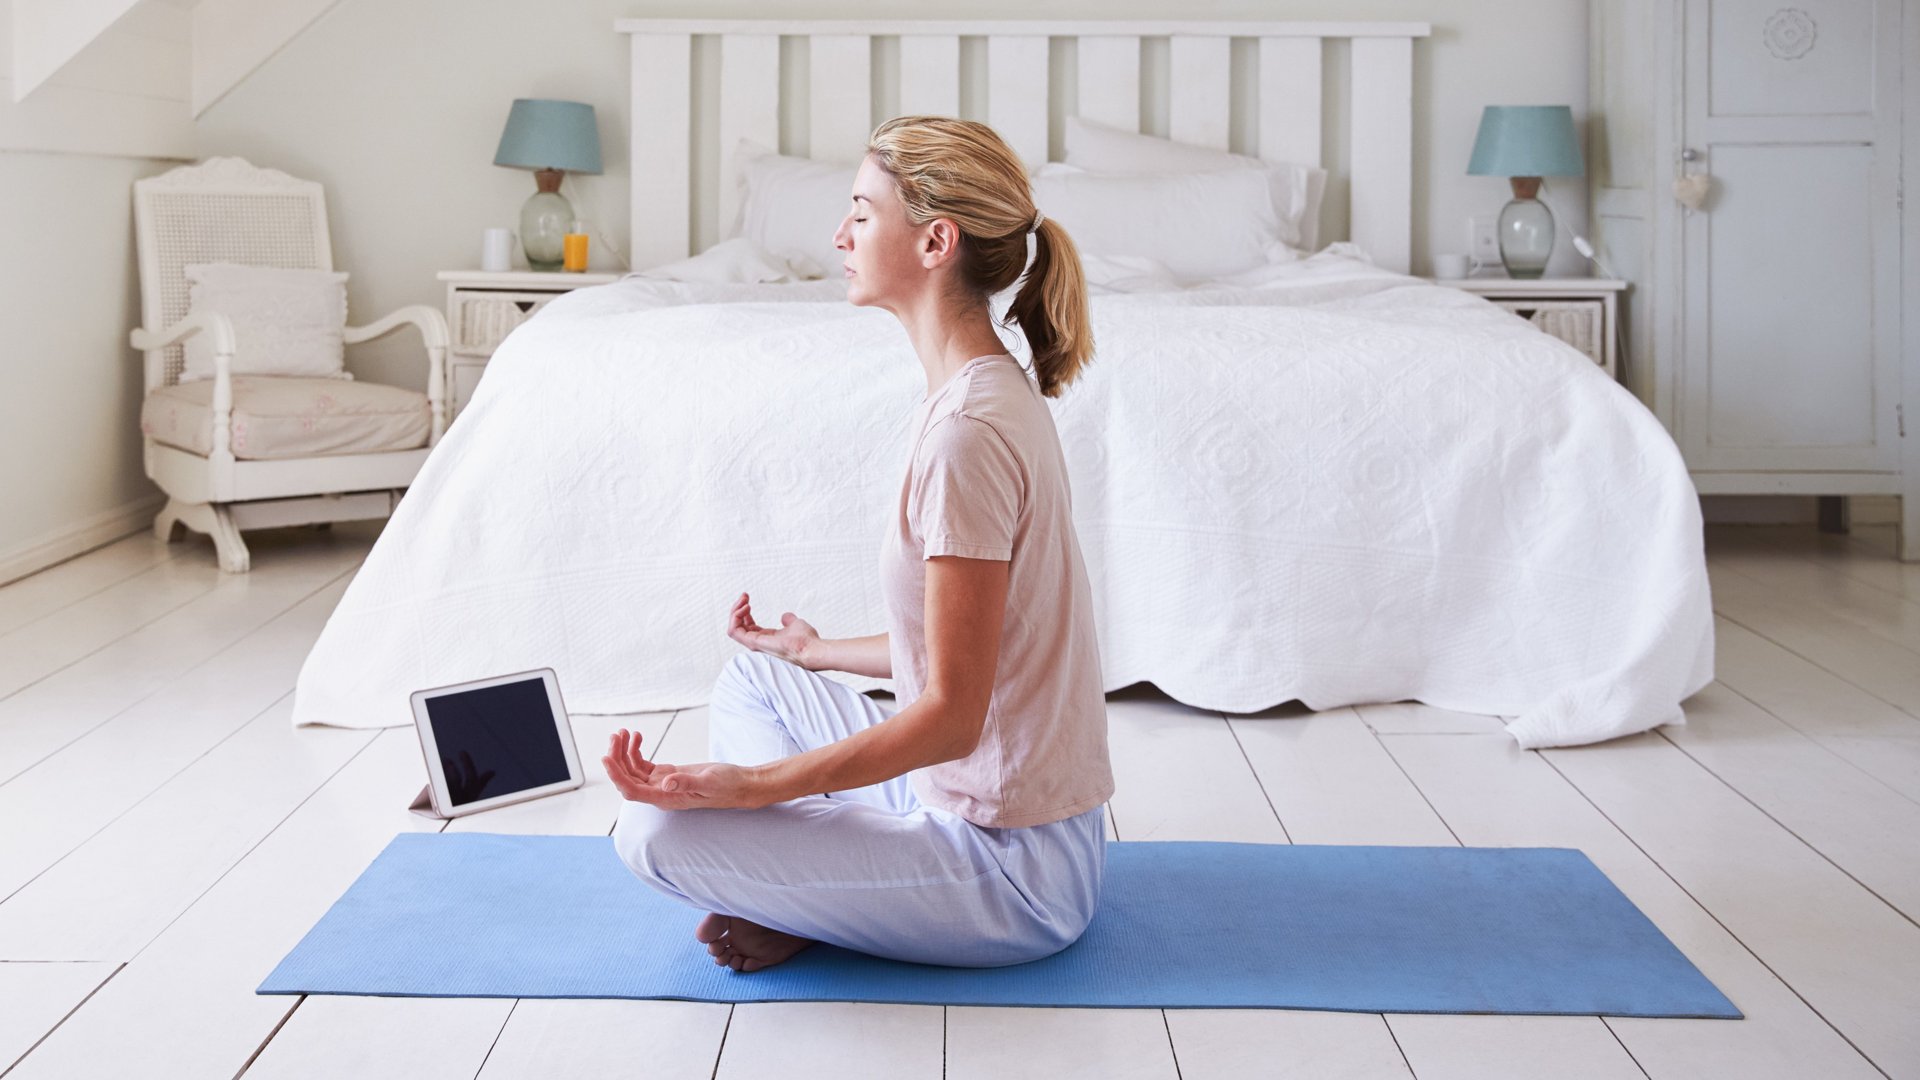 A woman uses a meditation app sitting on a blue yoga mat in front of her white bed